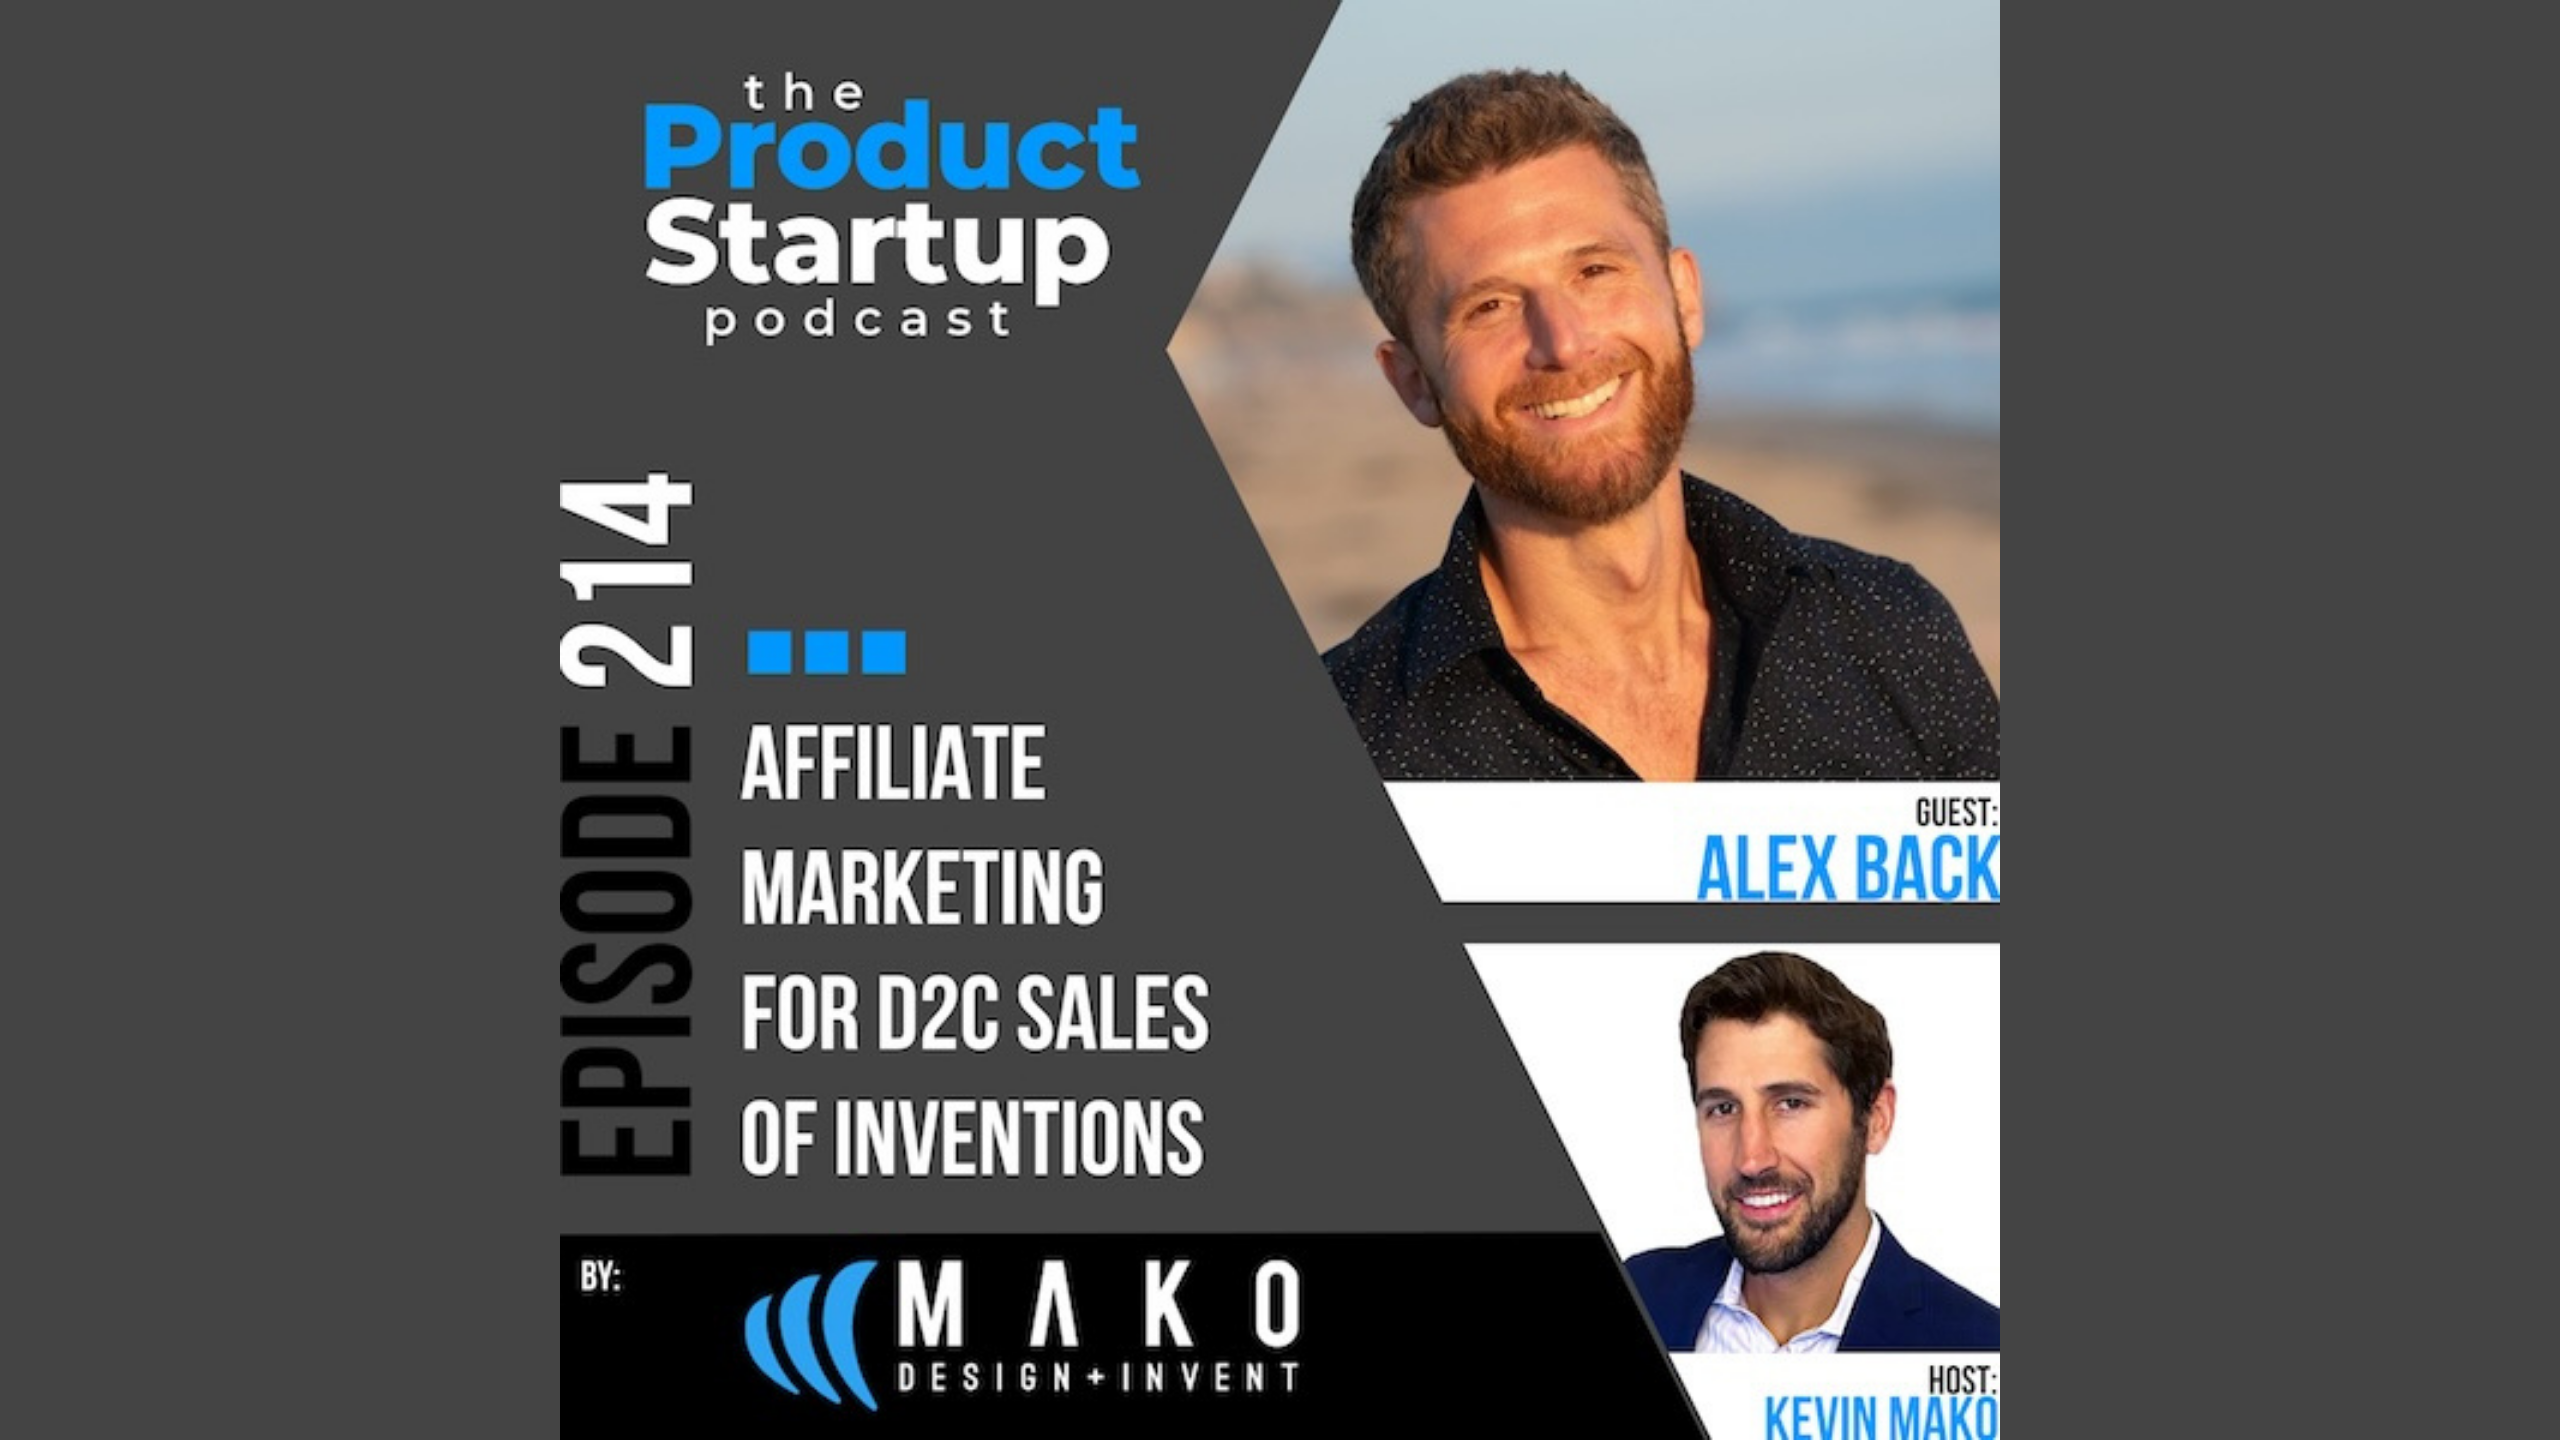 Promotional graphic for Episode 214 of "The Product Startup Podcast." Text reads ‚ÄúAffiliate Marketing for D2C Sales of Inventions.‚Äù Features guest Alex Back with a headshot and host Kevin Mako with a headshot at the bottom. Mako Design + Invent logo at the bottom.